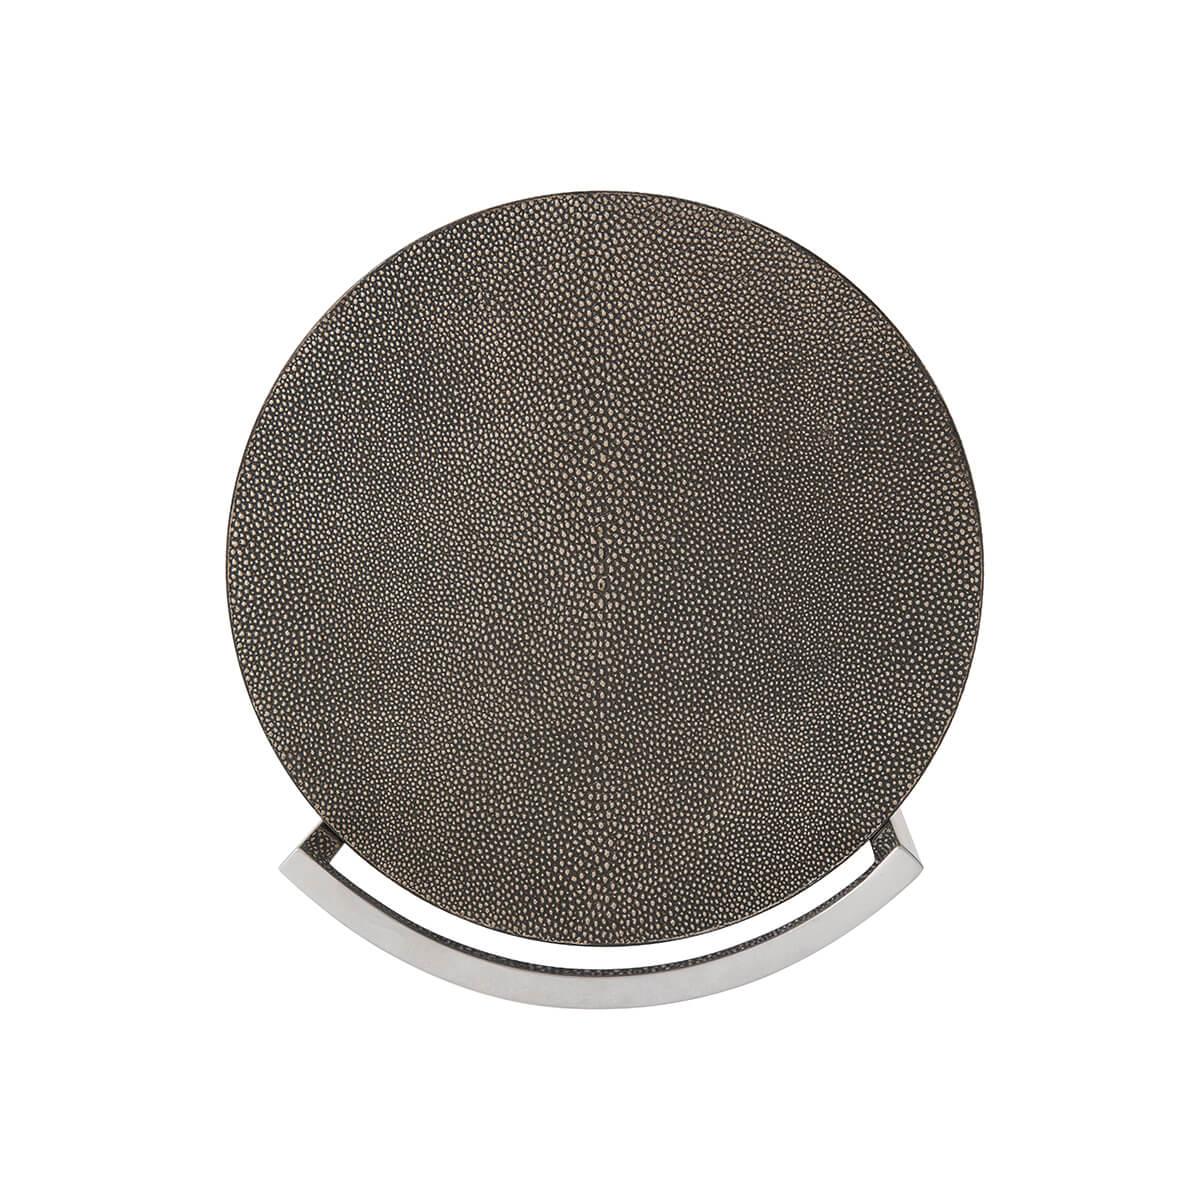 With a circular suspended faux shagreen wrapped top in a dark tempest finish supported by a slender nickel finish base.

Dimensions: 12